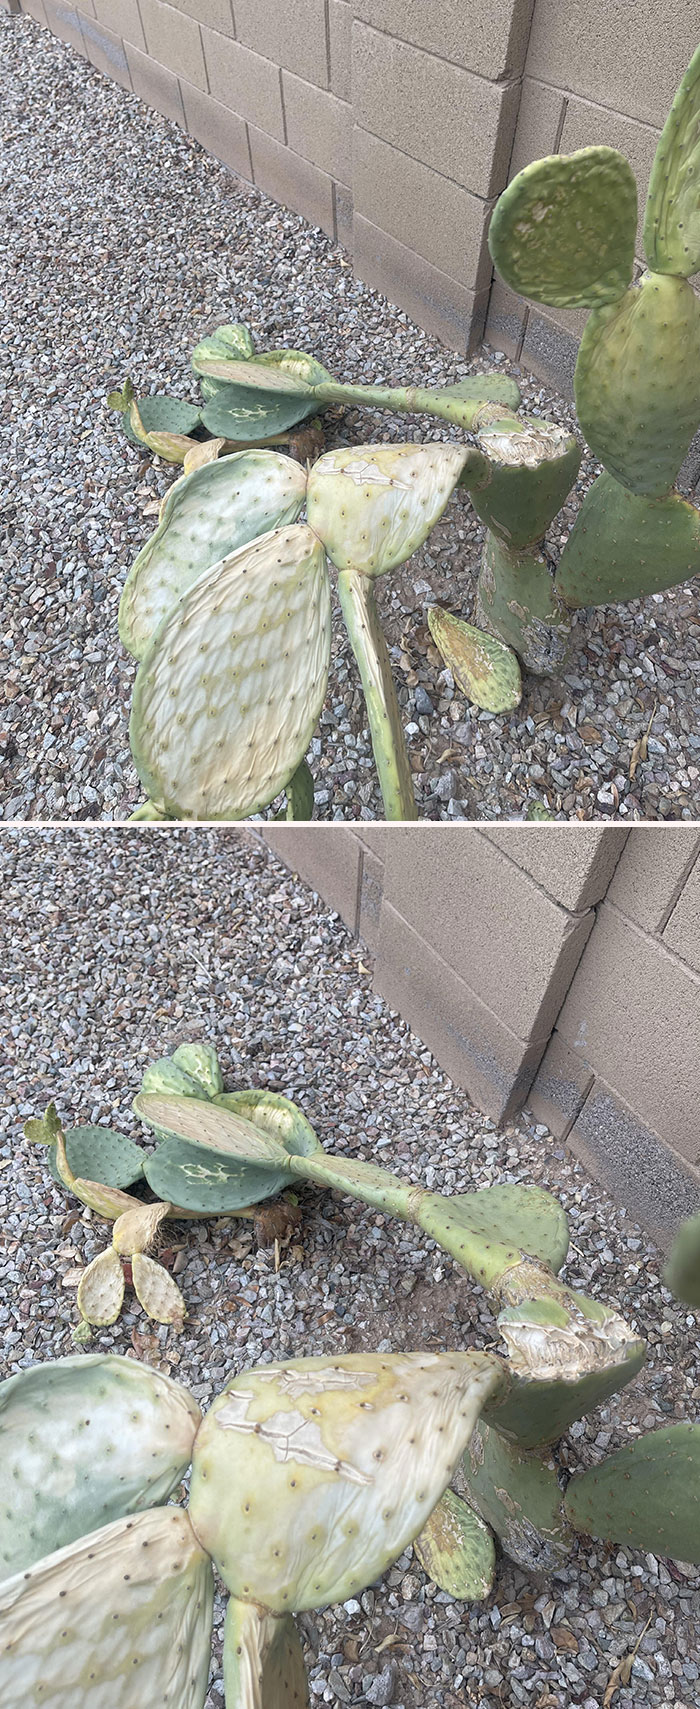 It’s So Hot In Phoenix That Our Cactus Is Cooking. Been Here 9 Years, Never Seen This